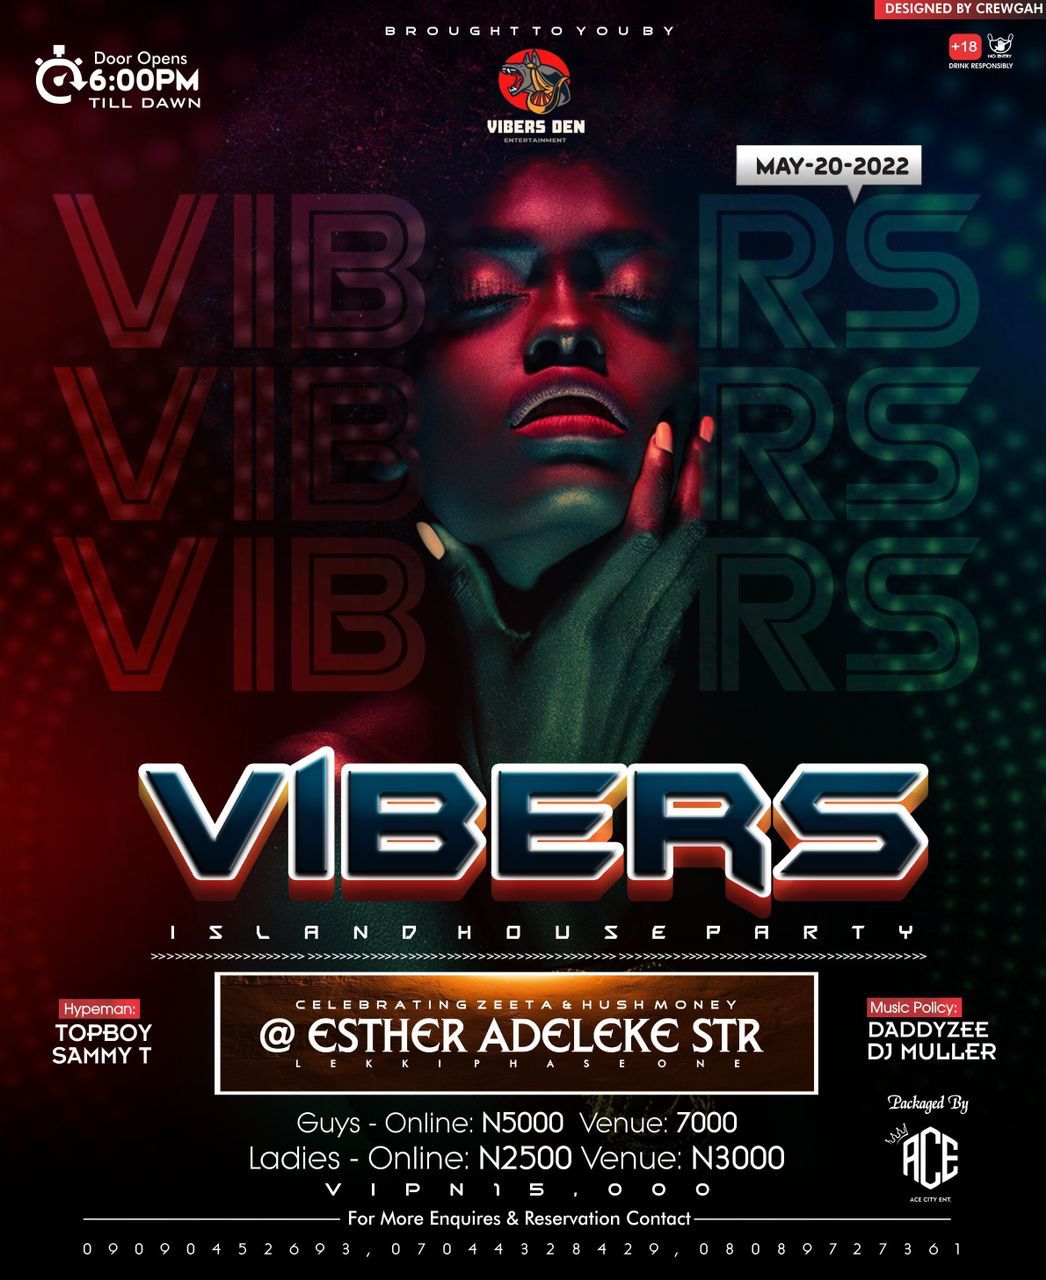 VIBERS DEN HOUSE PARTY Post free event in Nigeria using tickethub.ng, buy and sell tickets to event